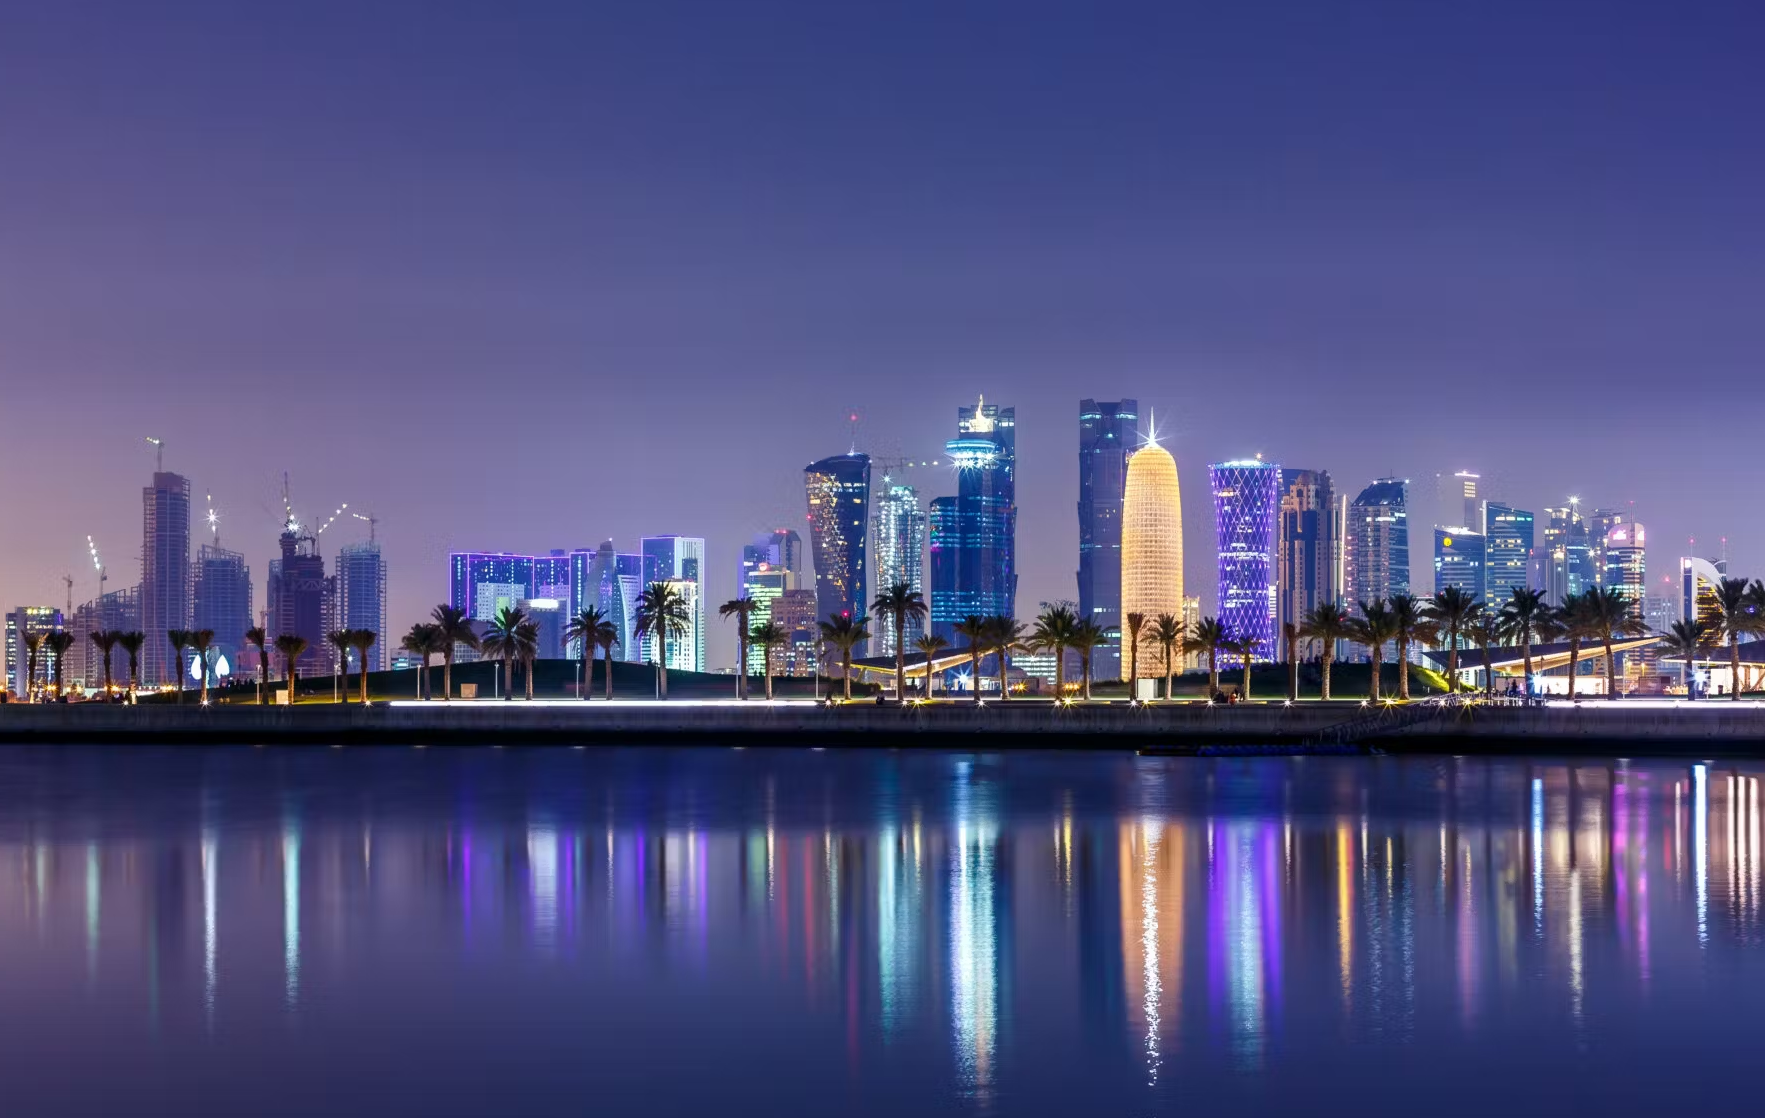 Night time. A brightly lit skyline, viewed across calm waters, featuring several modern glass skyscrapers. There is a row of palm trees where the water meets the shoreline.